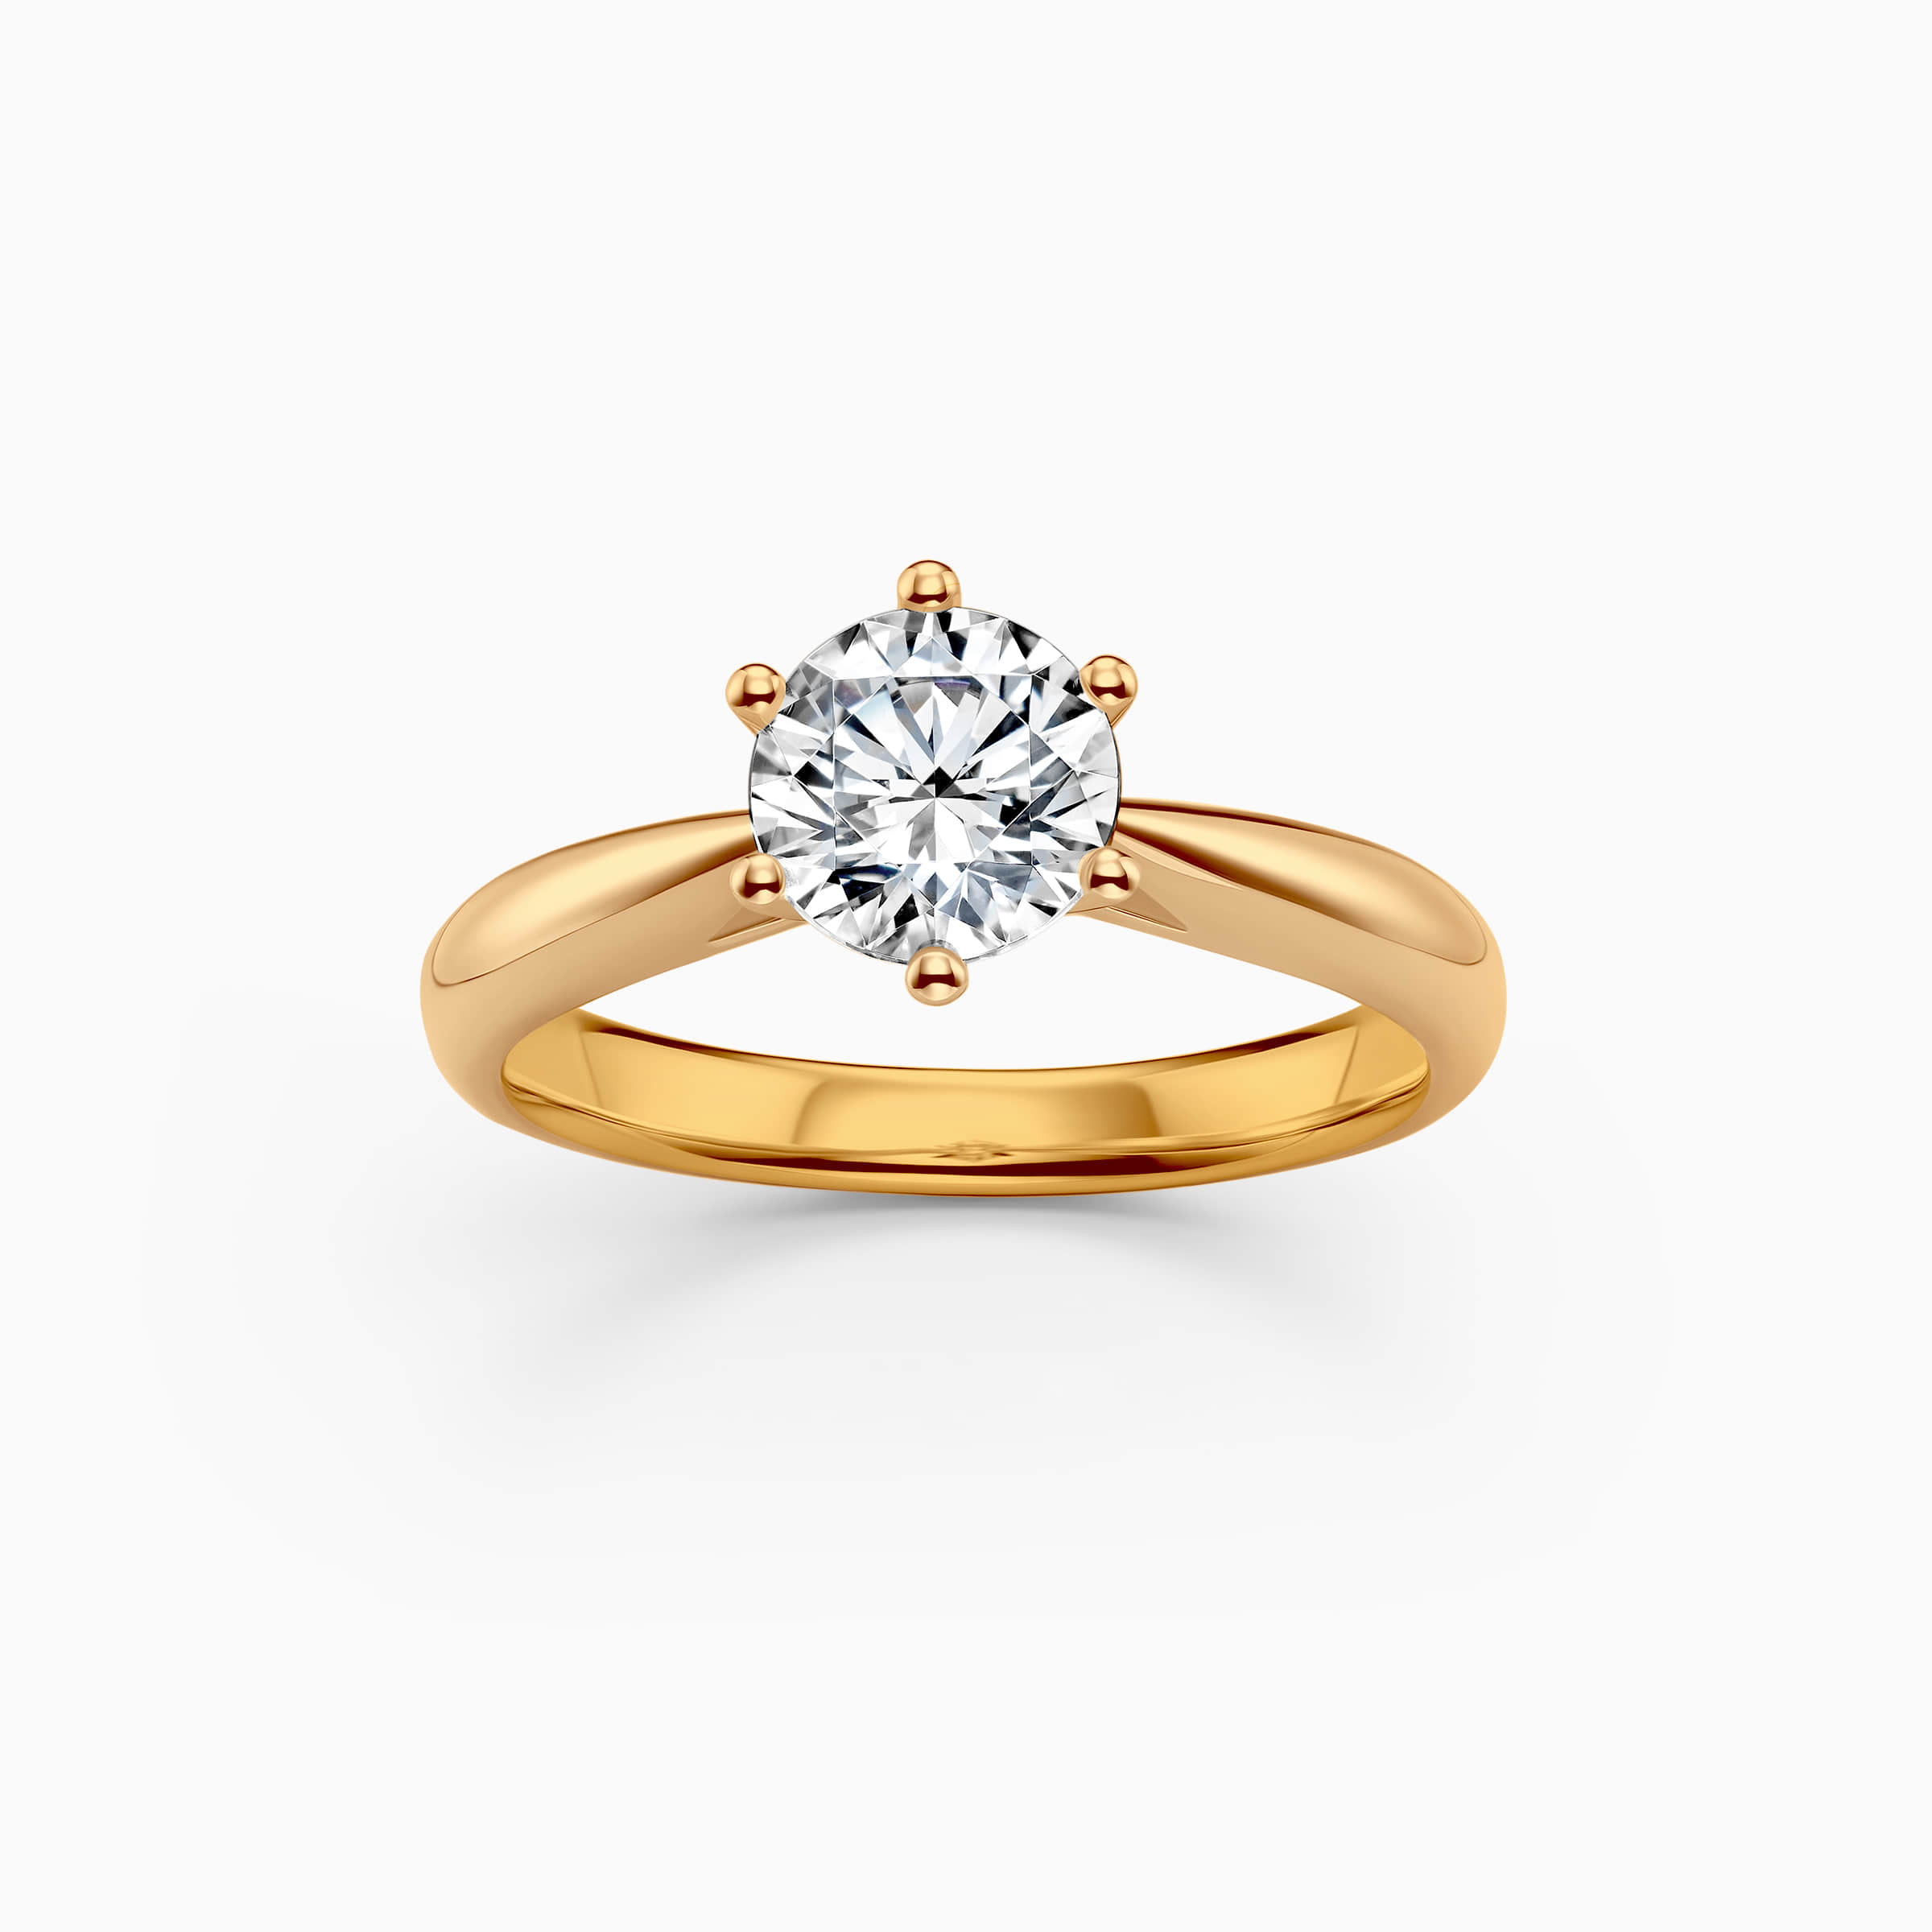 Darry Ring 6 prong promise ring in yellow gold